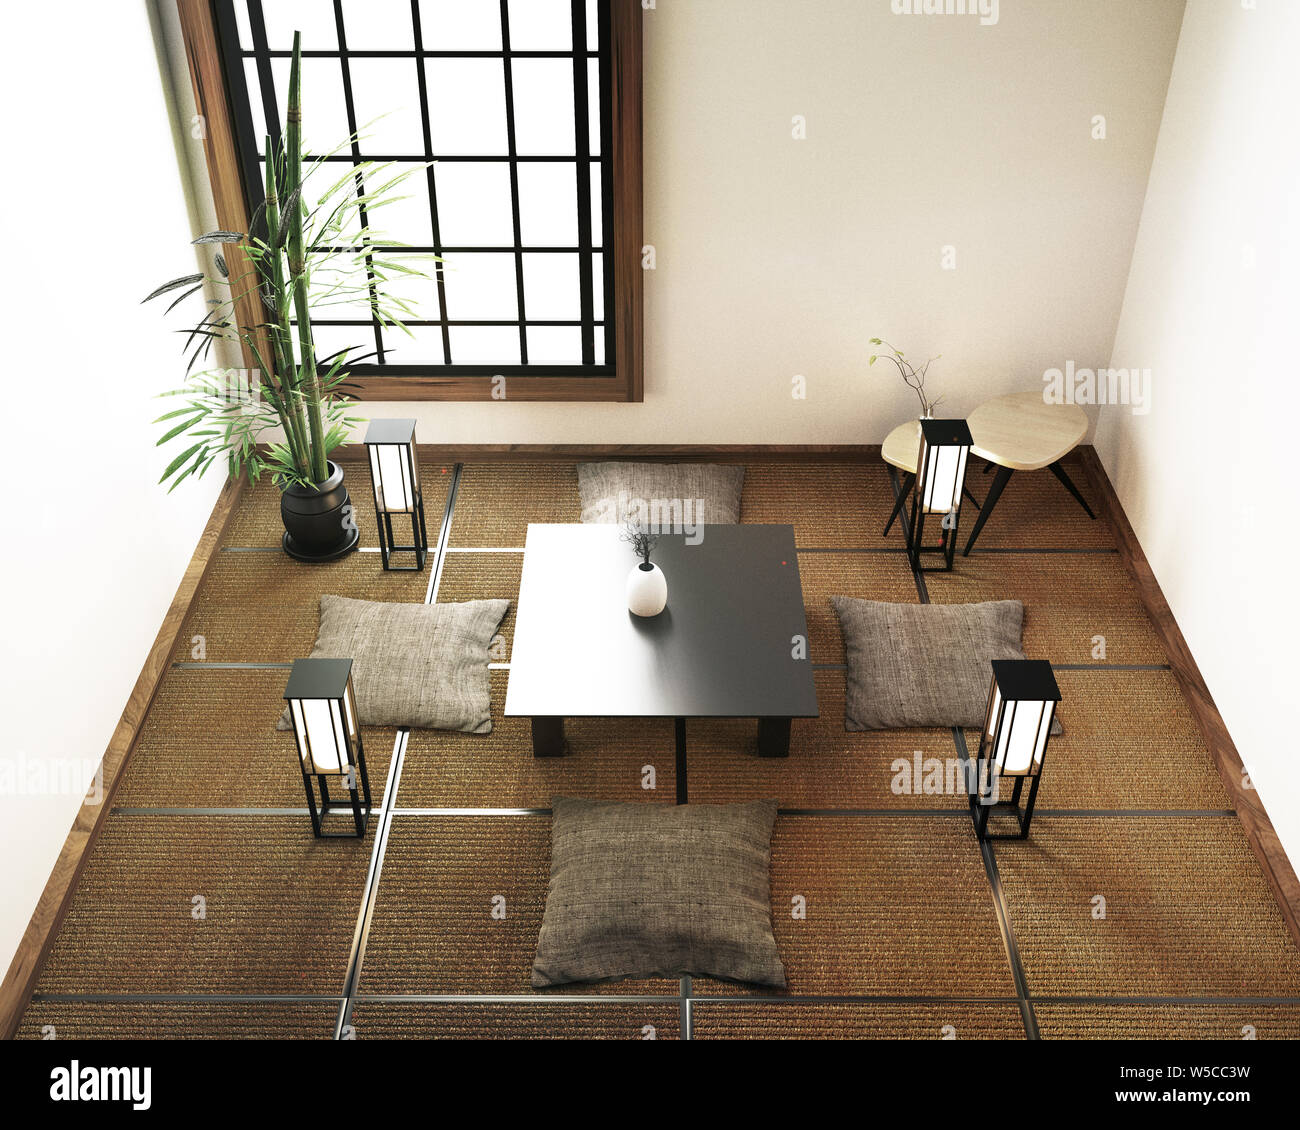 interior design living room with table,tatami mat floor. 3d rendering Stock Photo